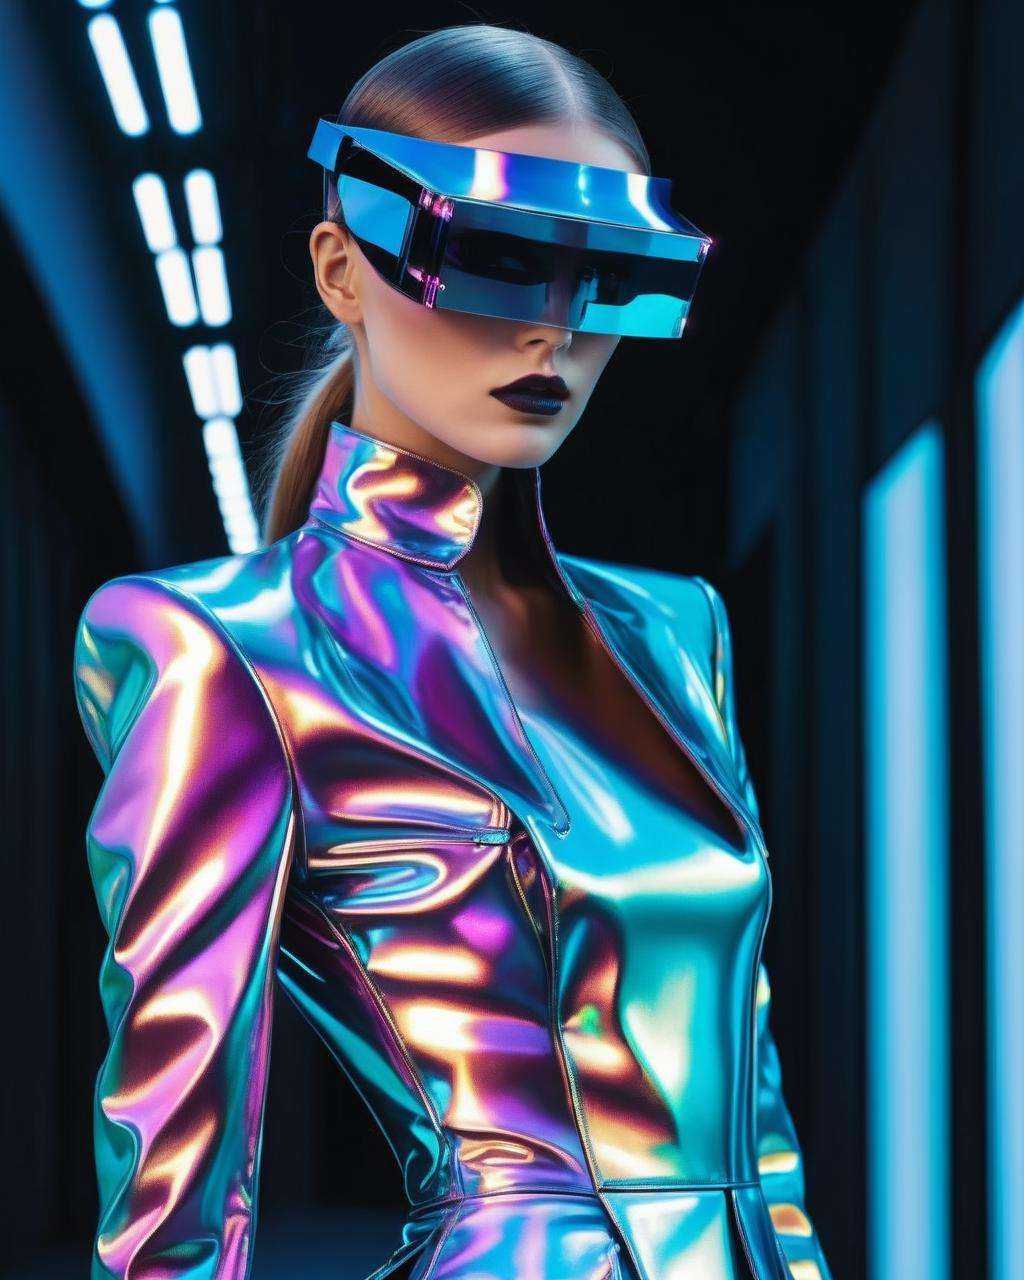 In a cyber-couture revolution, a digital diva graces the scene in holographic haute couture, infusing neo-noir sophistication into the fashion world.<lora:M_Fashion:1.0>